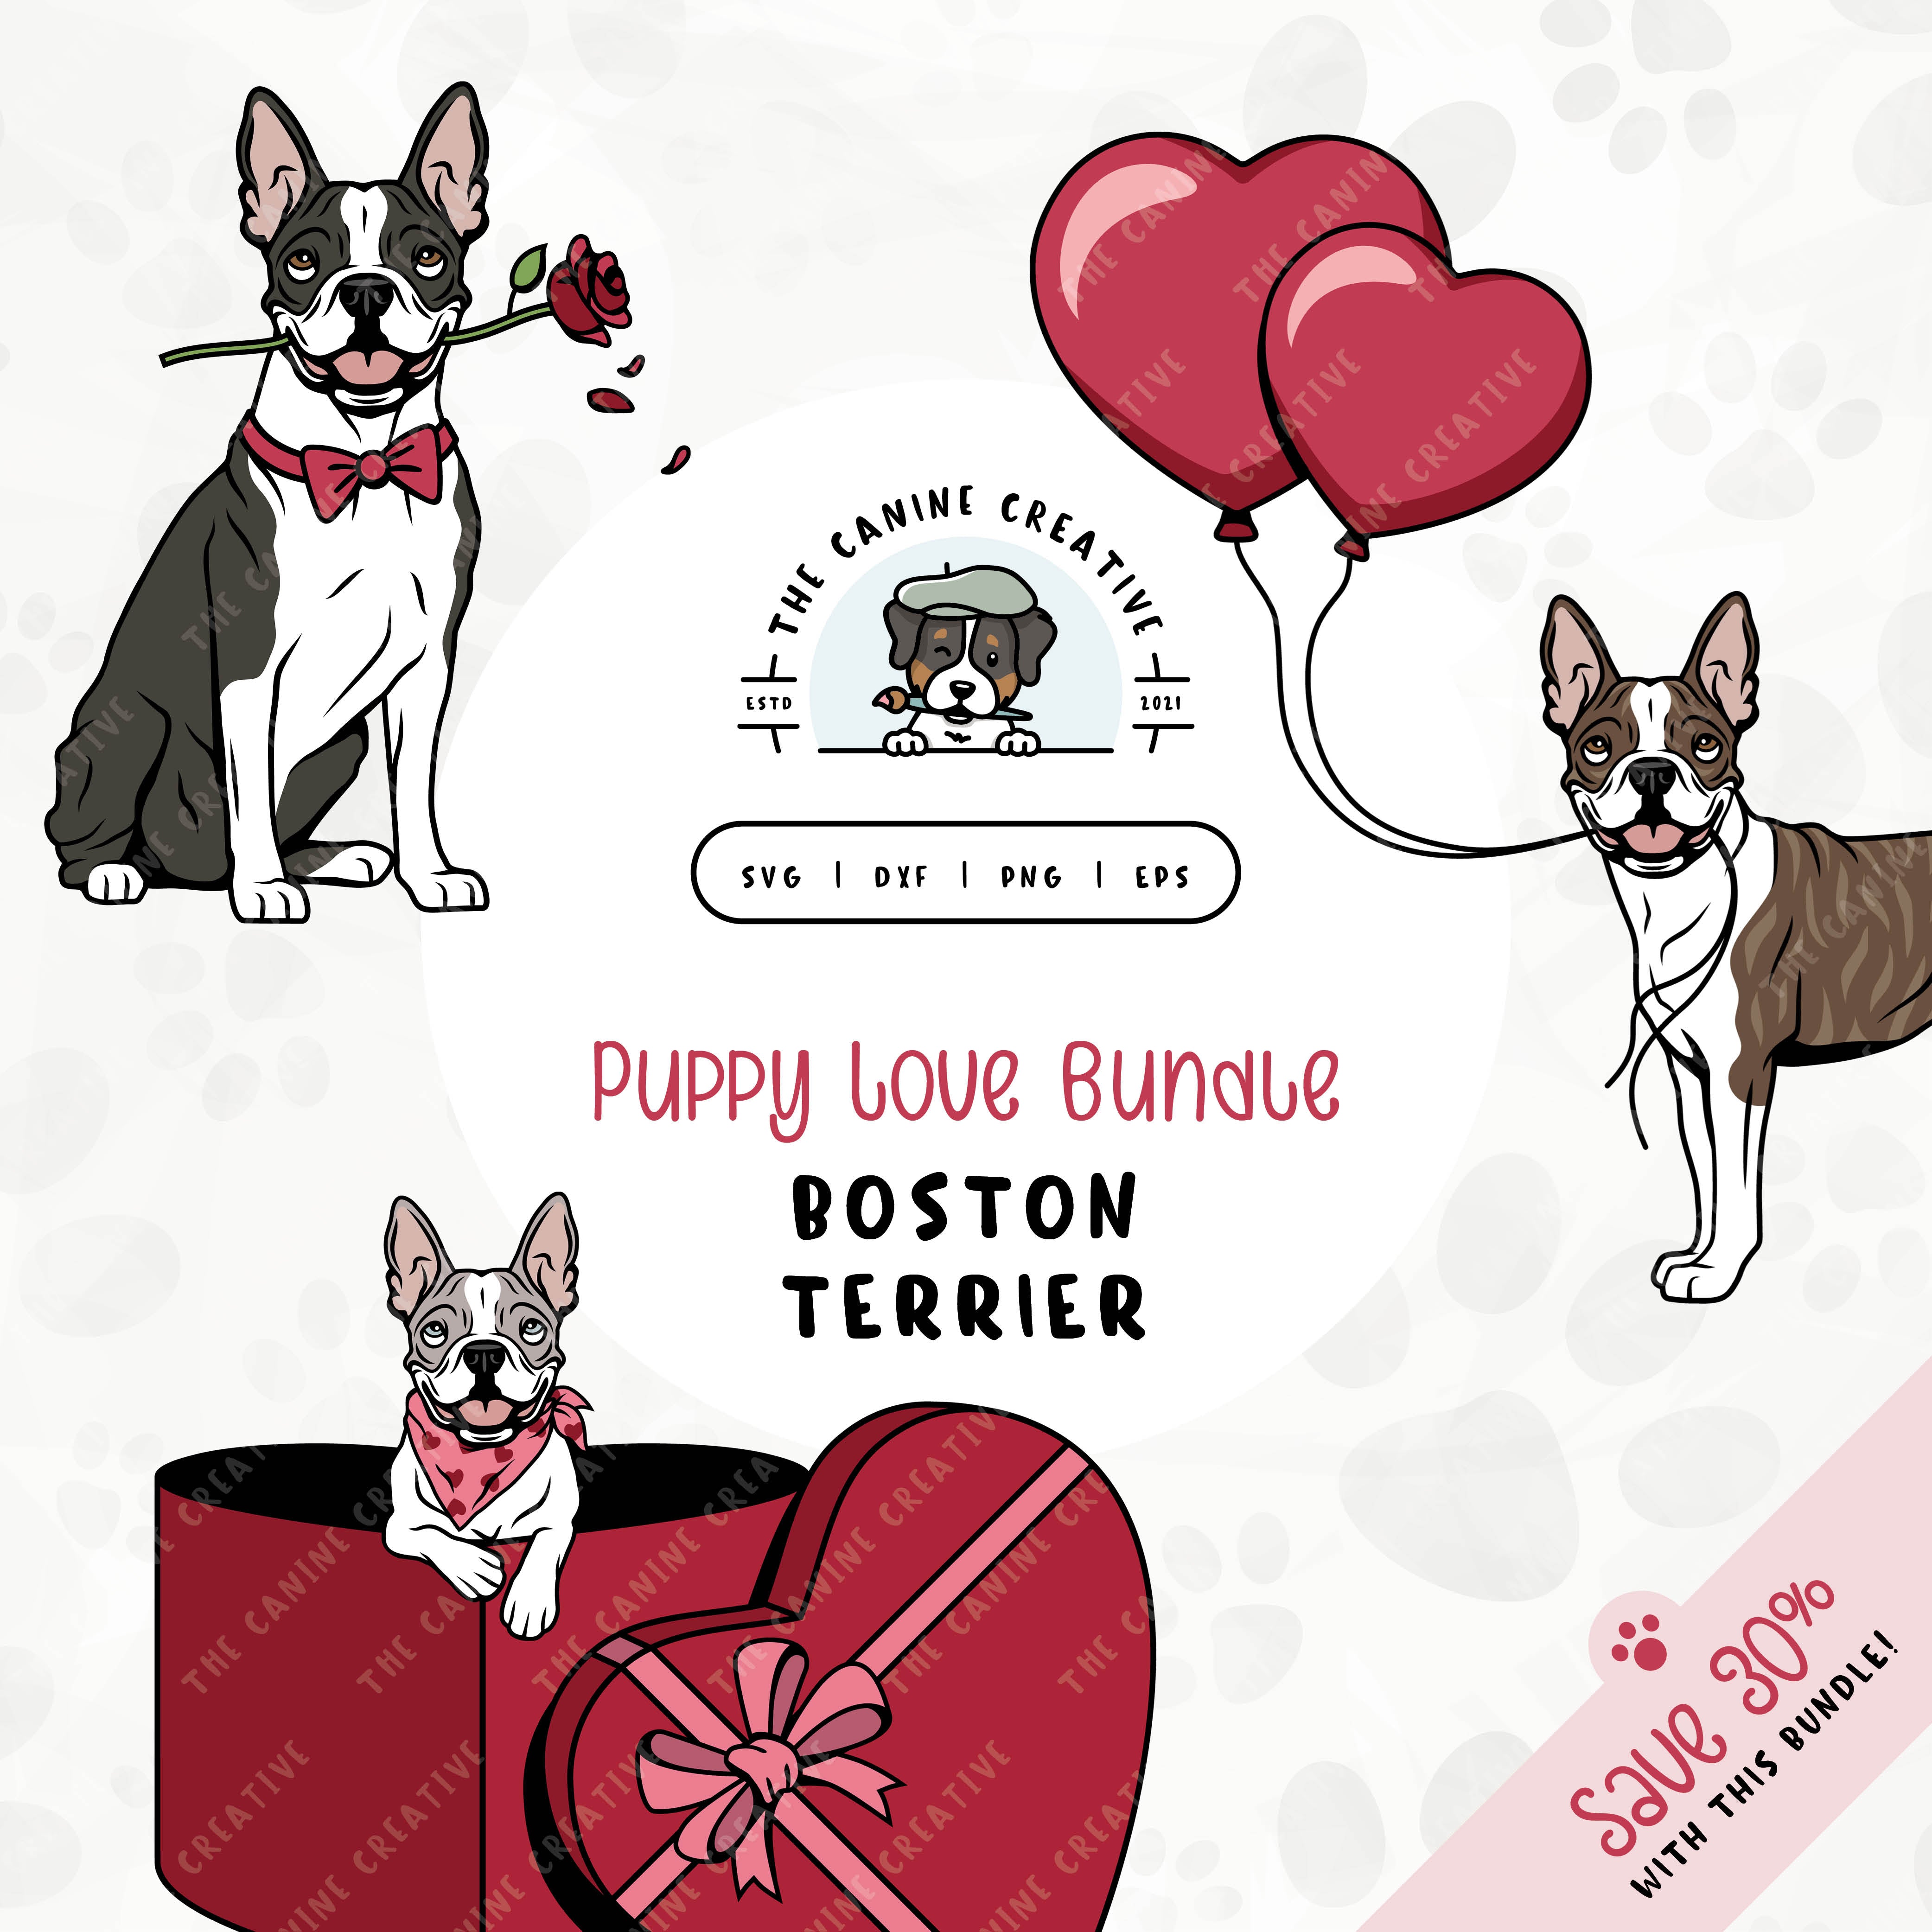 This 3-pack puppy love illustration bundle features Boston Terriers holding heart balloons, peeking out of a heart-shaped box, and holding a rose. File formats include: SVG, DXF, PNG, and EPS.